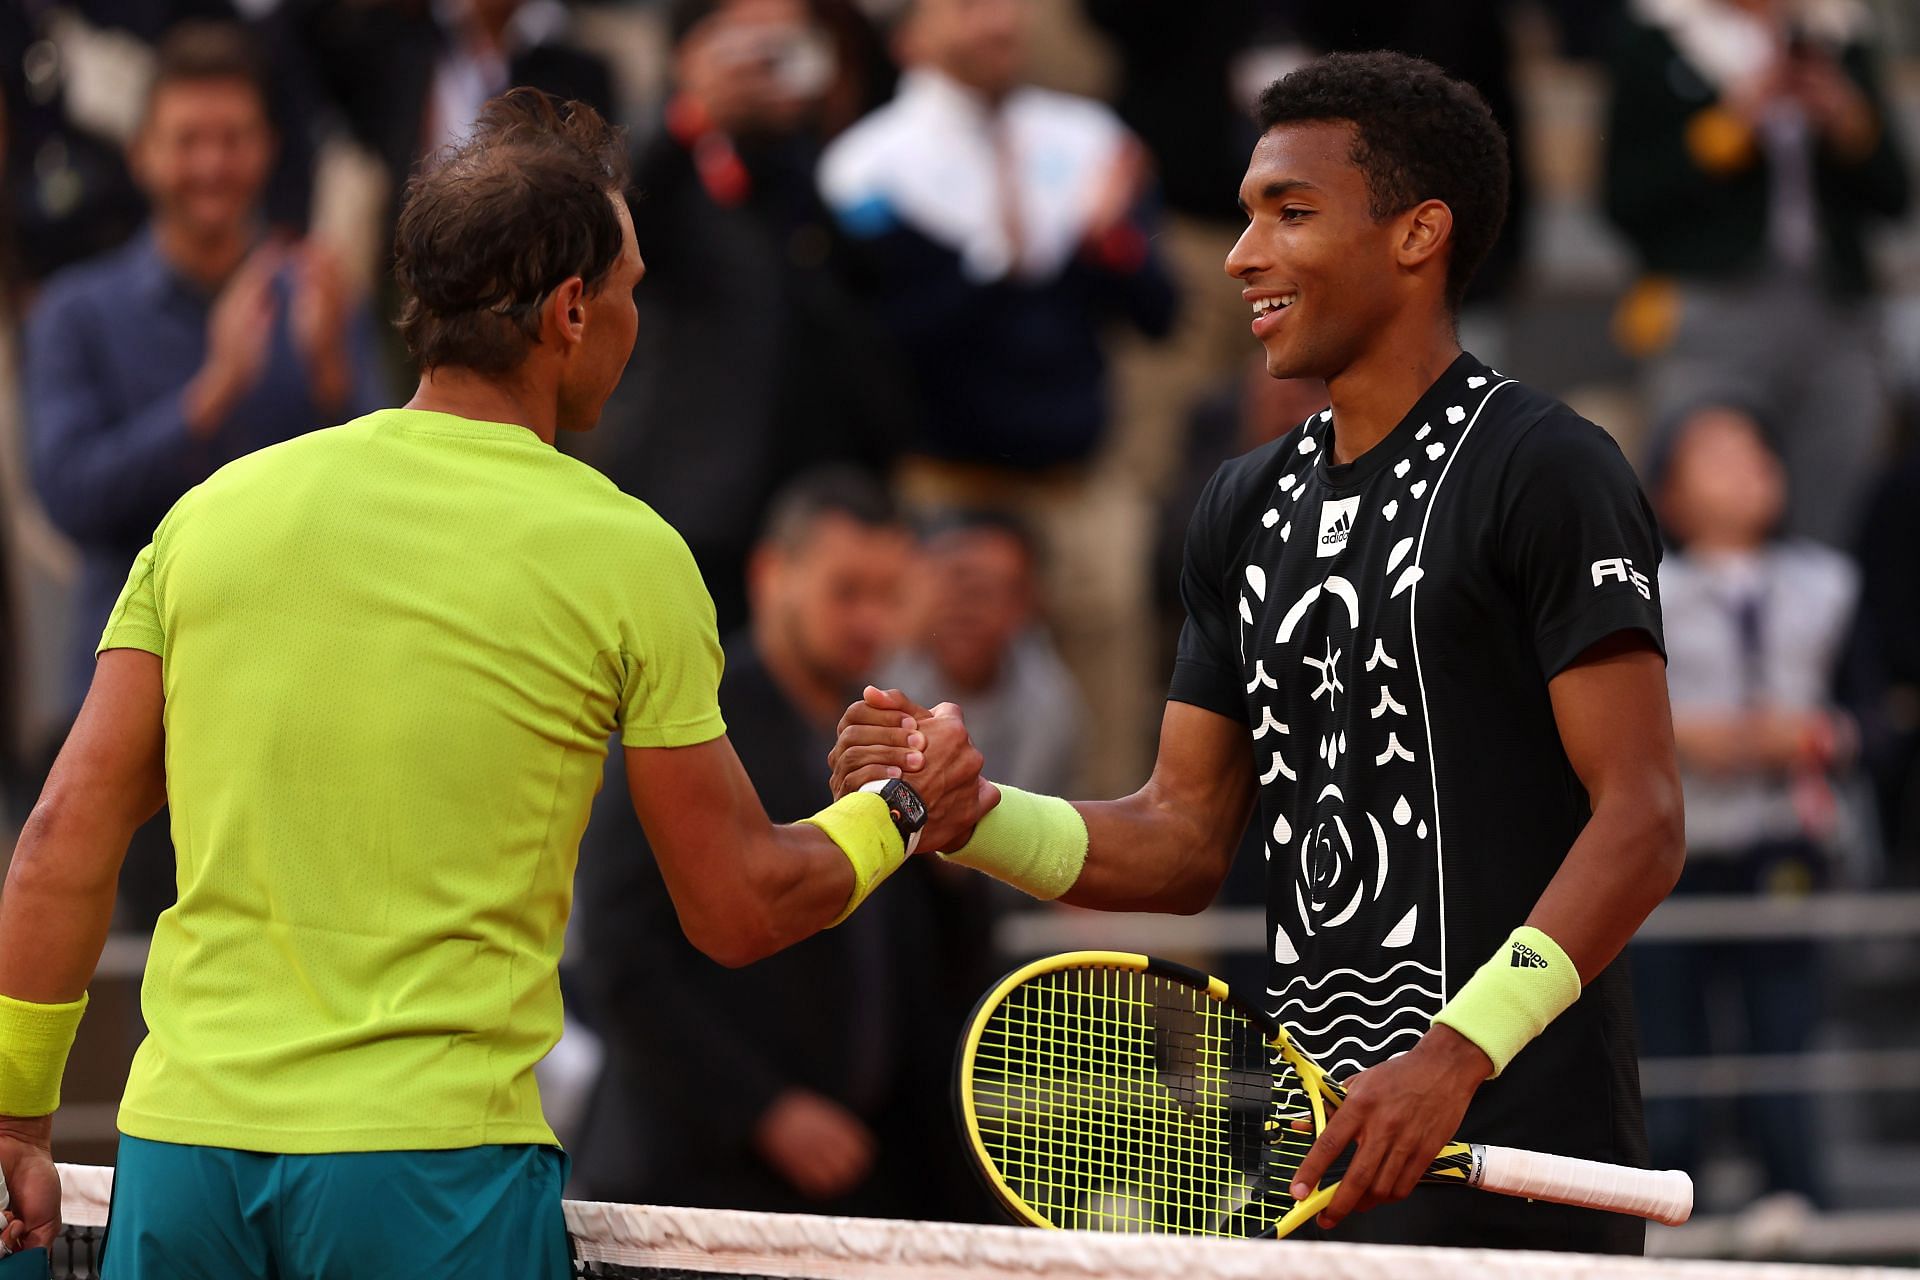 Rafael Nadal shakes hands with Felix Auger-Aliassime after their 2022 French Open match